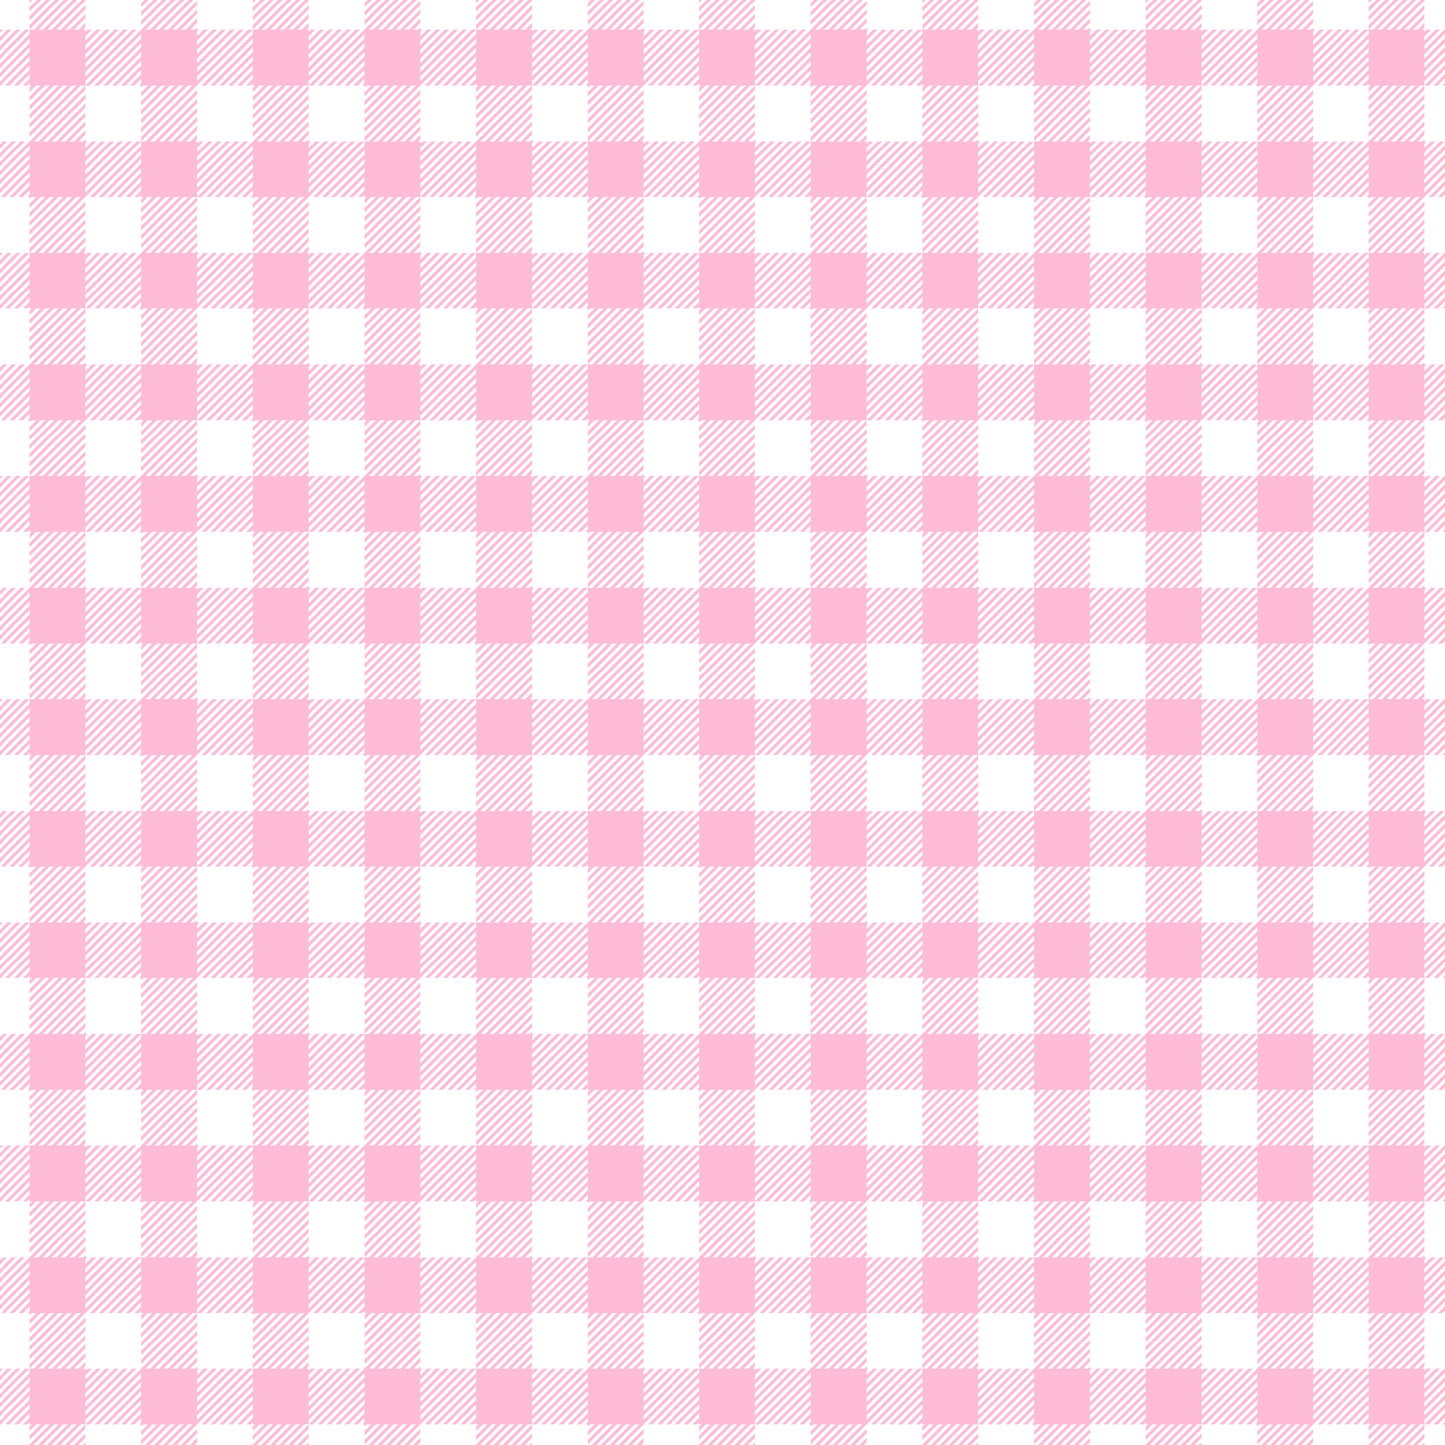 Easter Plaid - Pink and White 007